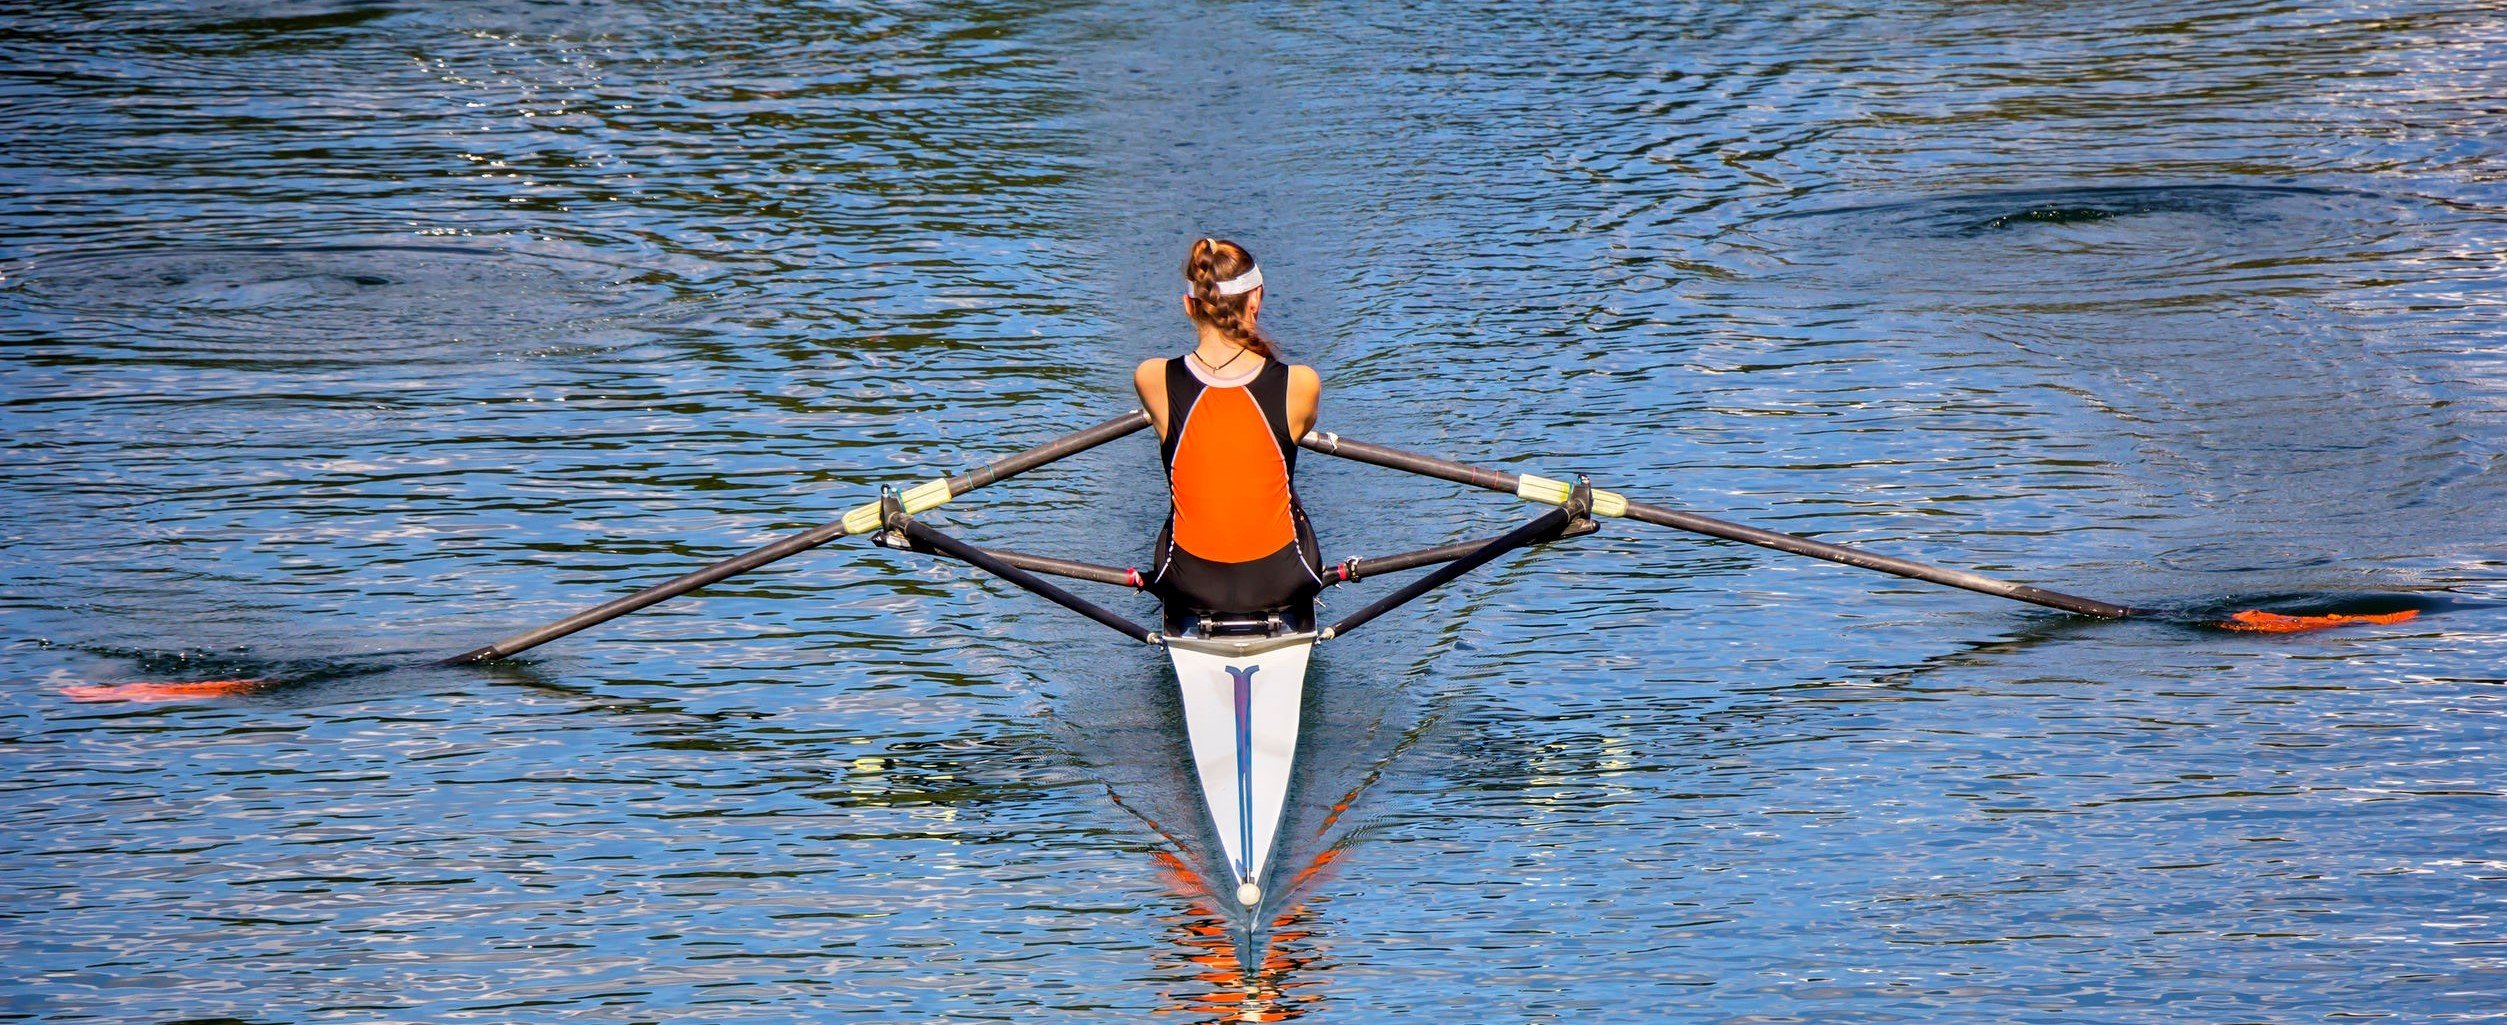 The woman rower in a boat, rowing on the tranquil lake